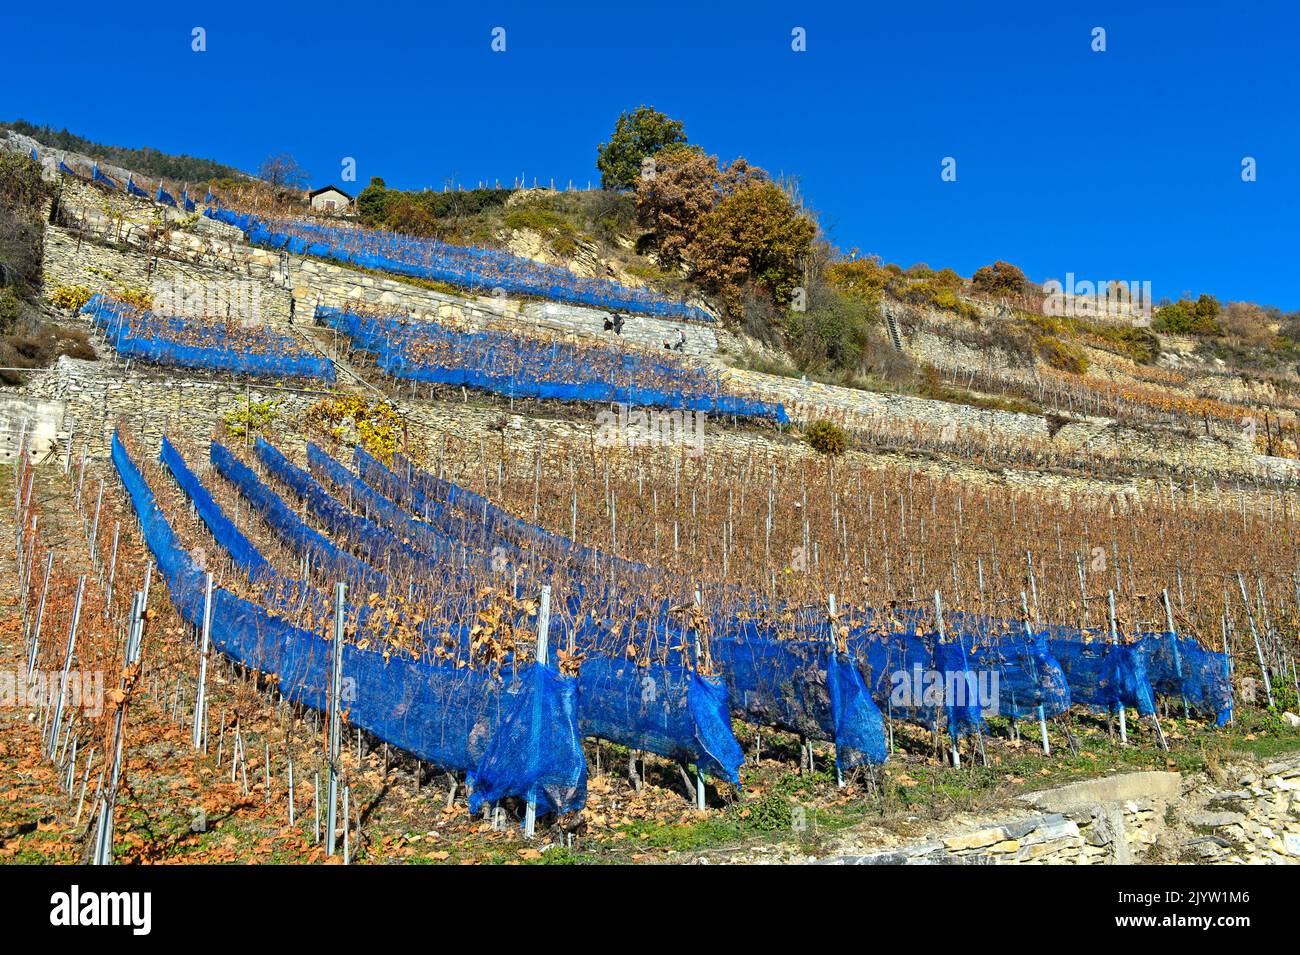 Blue bird protection nets as protection against bird damage in a vineyard in the Vetroz wine region, Vetroz, Valais, Switzerland Stock Photo